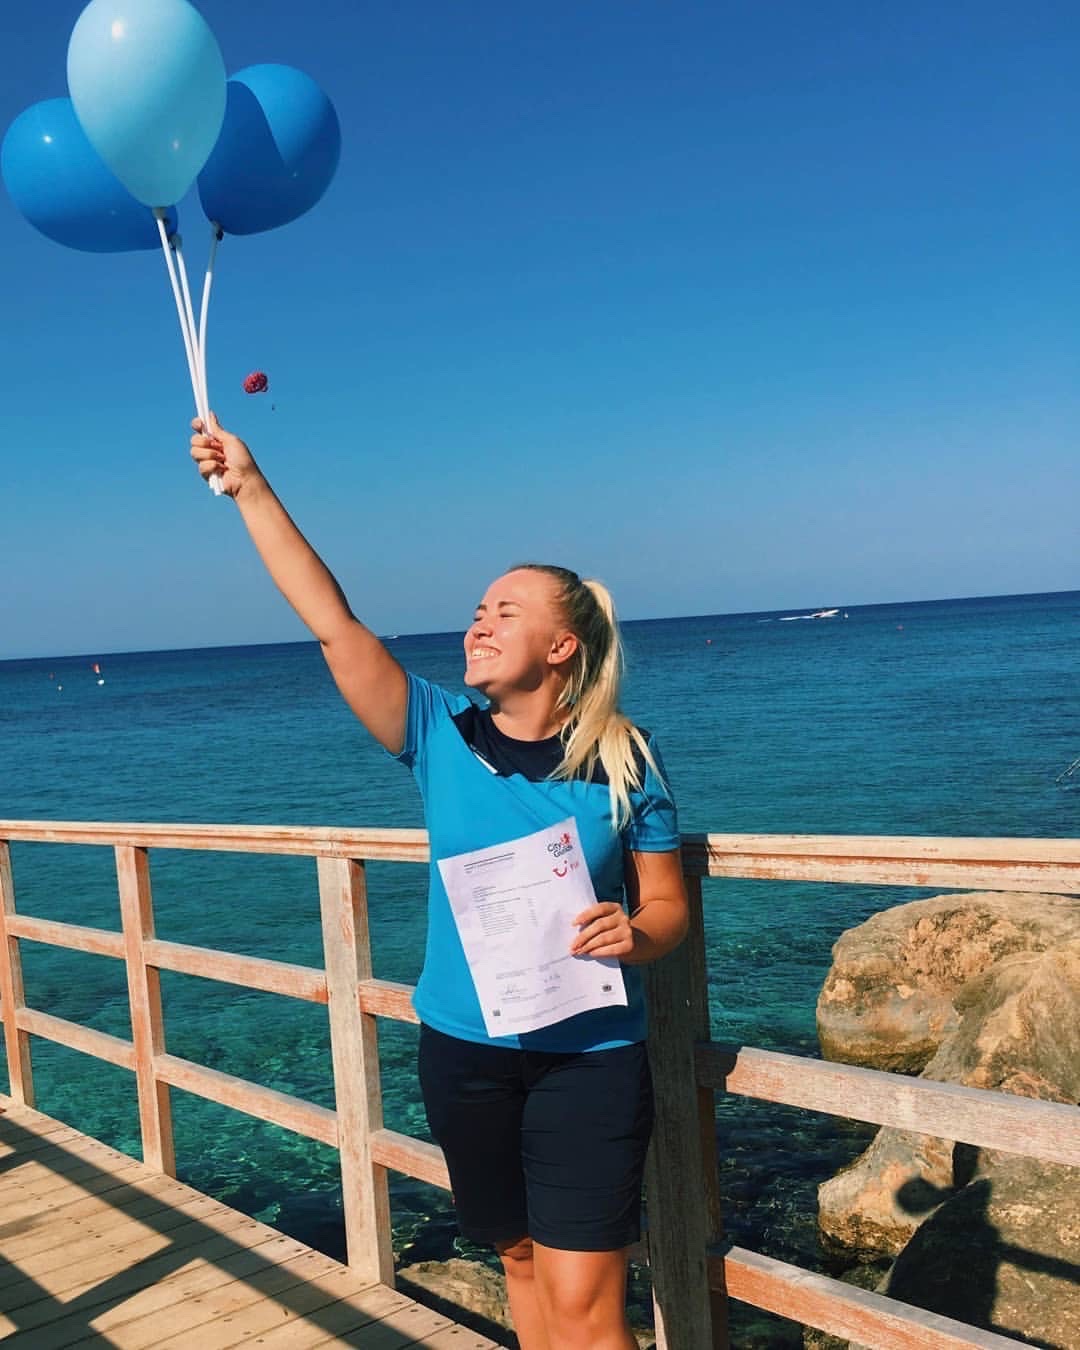 A kids rep working abroad is holding some balloons as she celebrates here childcare qualification. She is wearing a TUI uniform and smiling with the sea and a blue sky in the background. She is stood on a raised promenade.